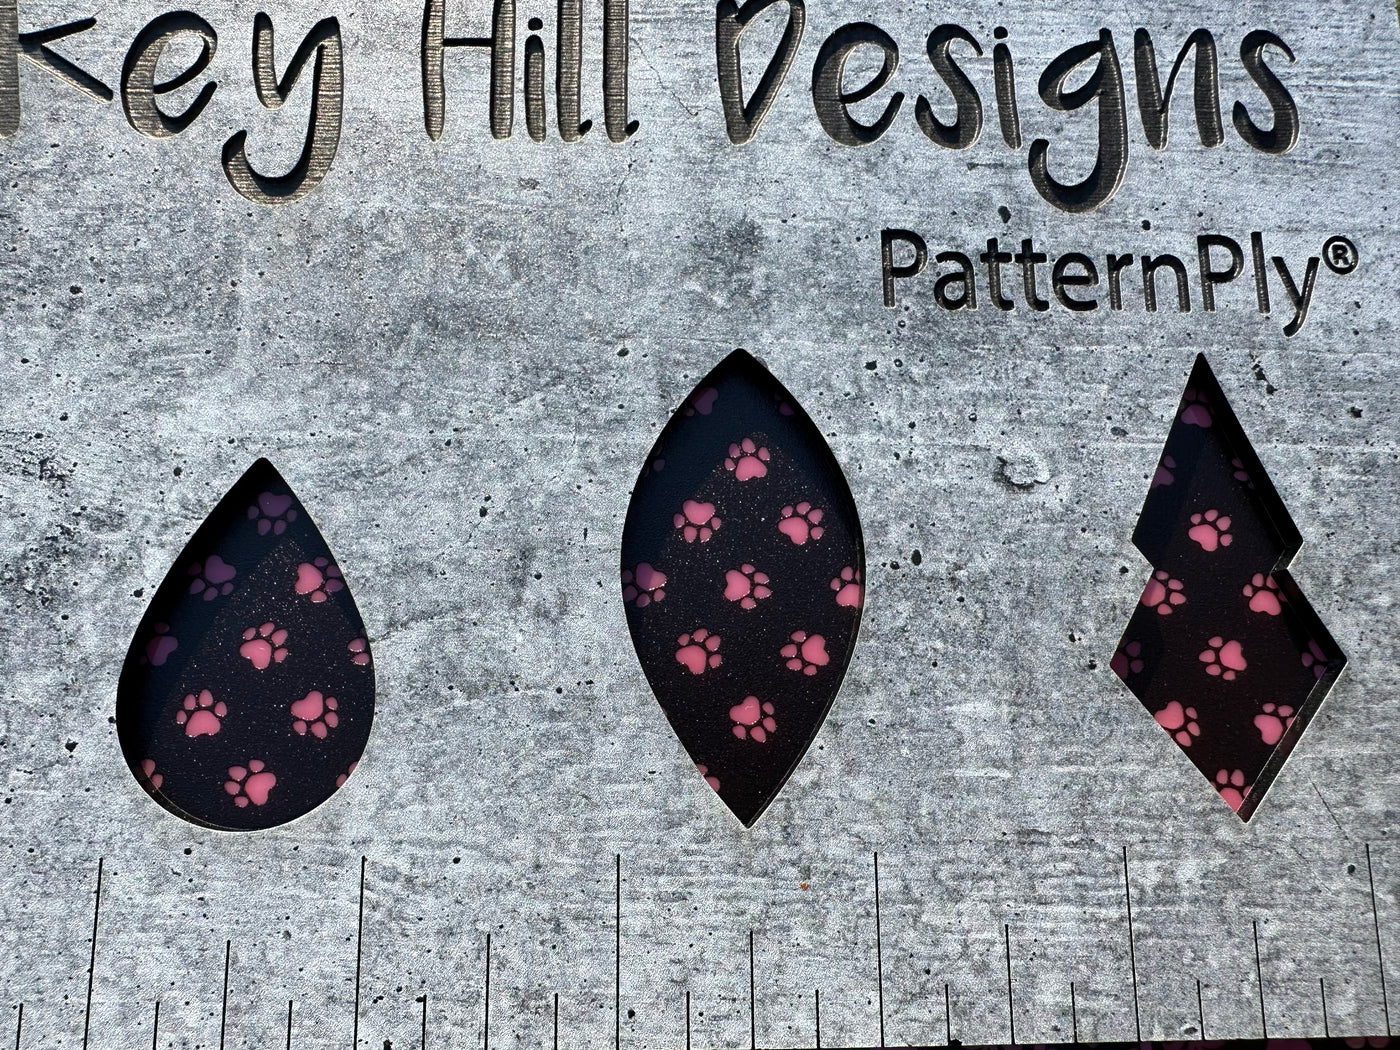 PatternPly® Scattered Pawprints BLACK